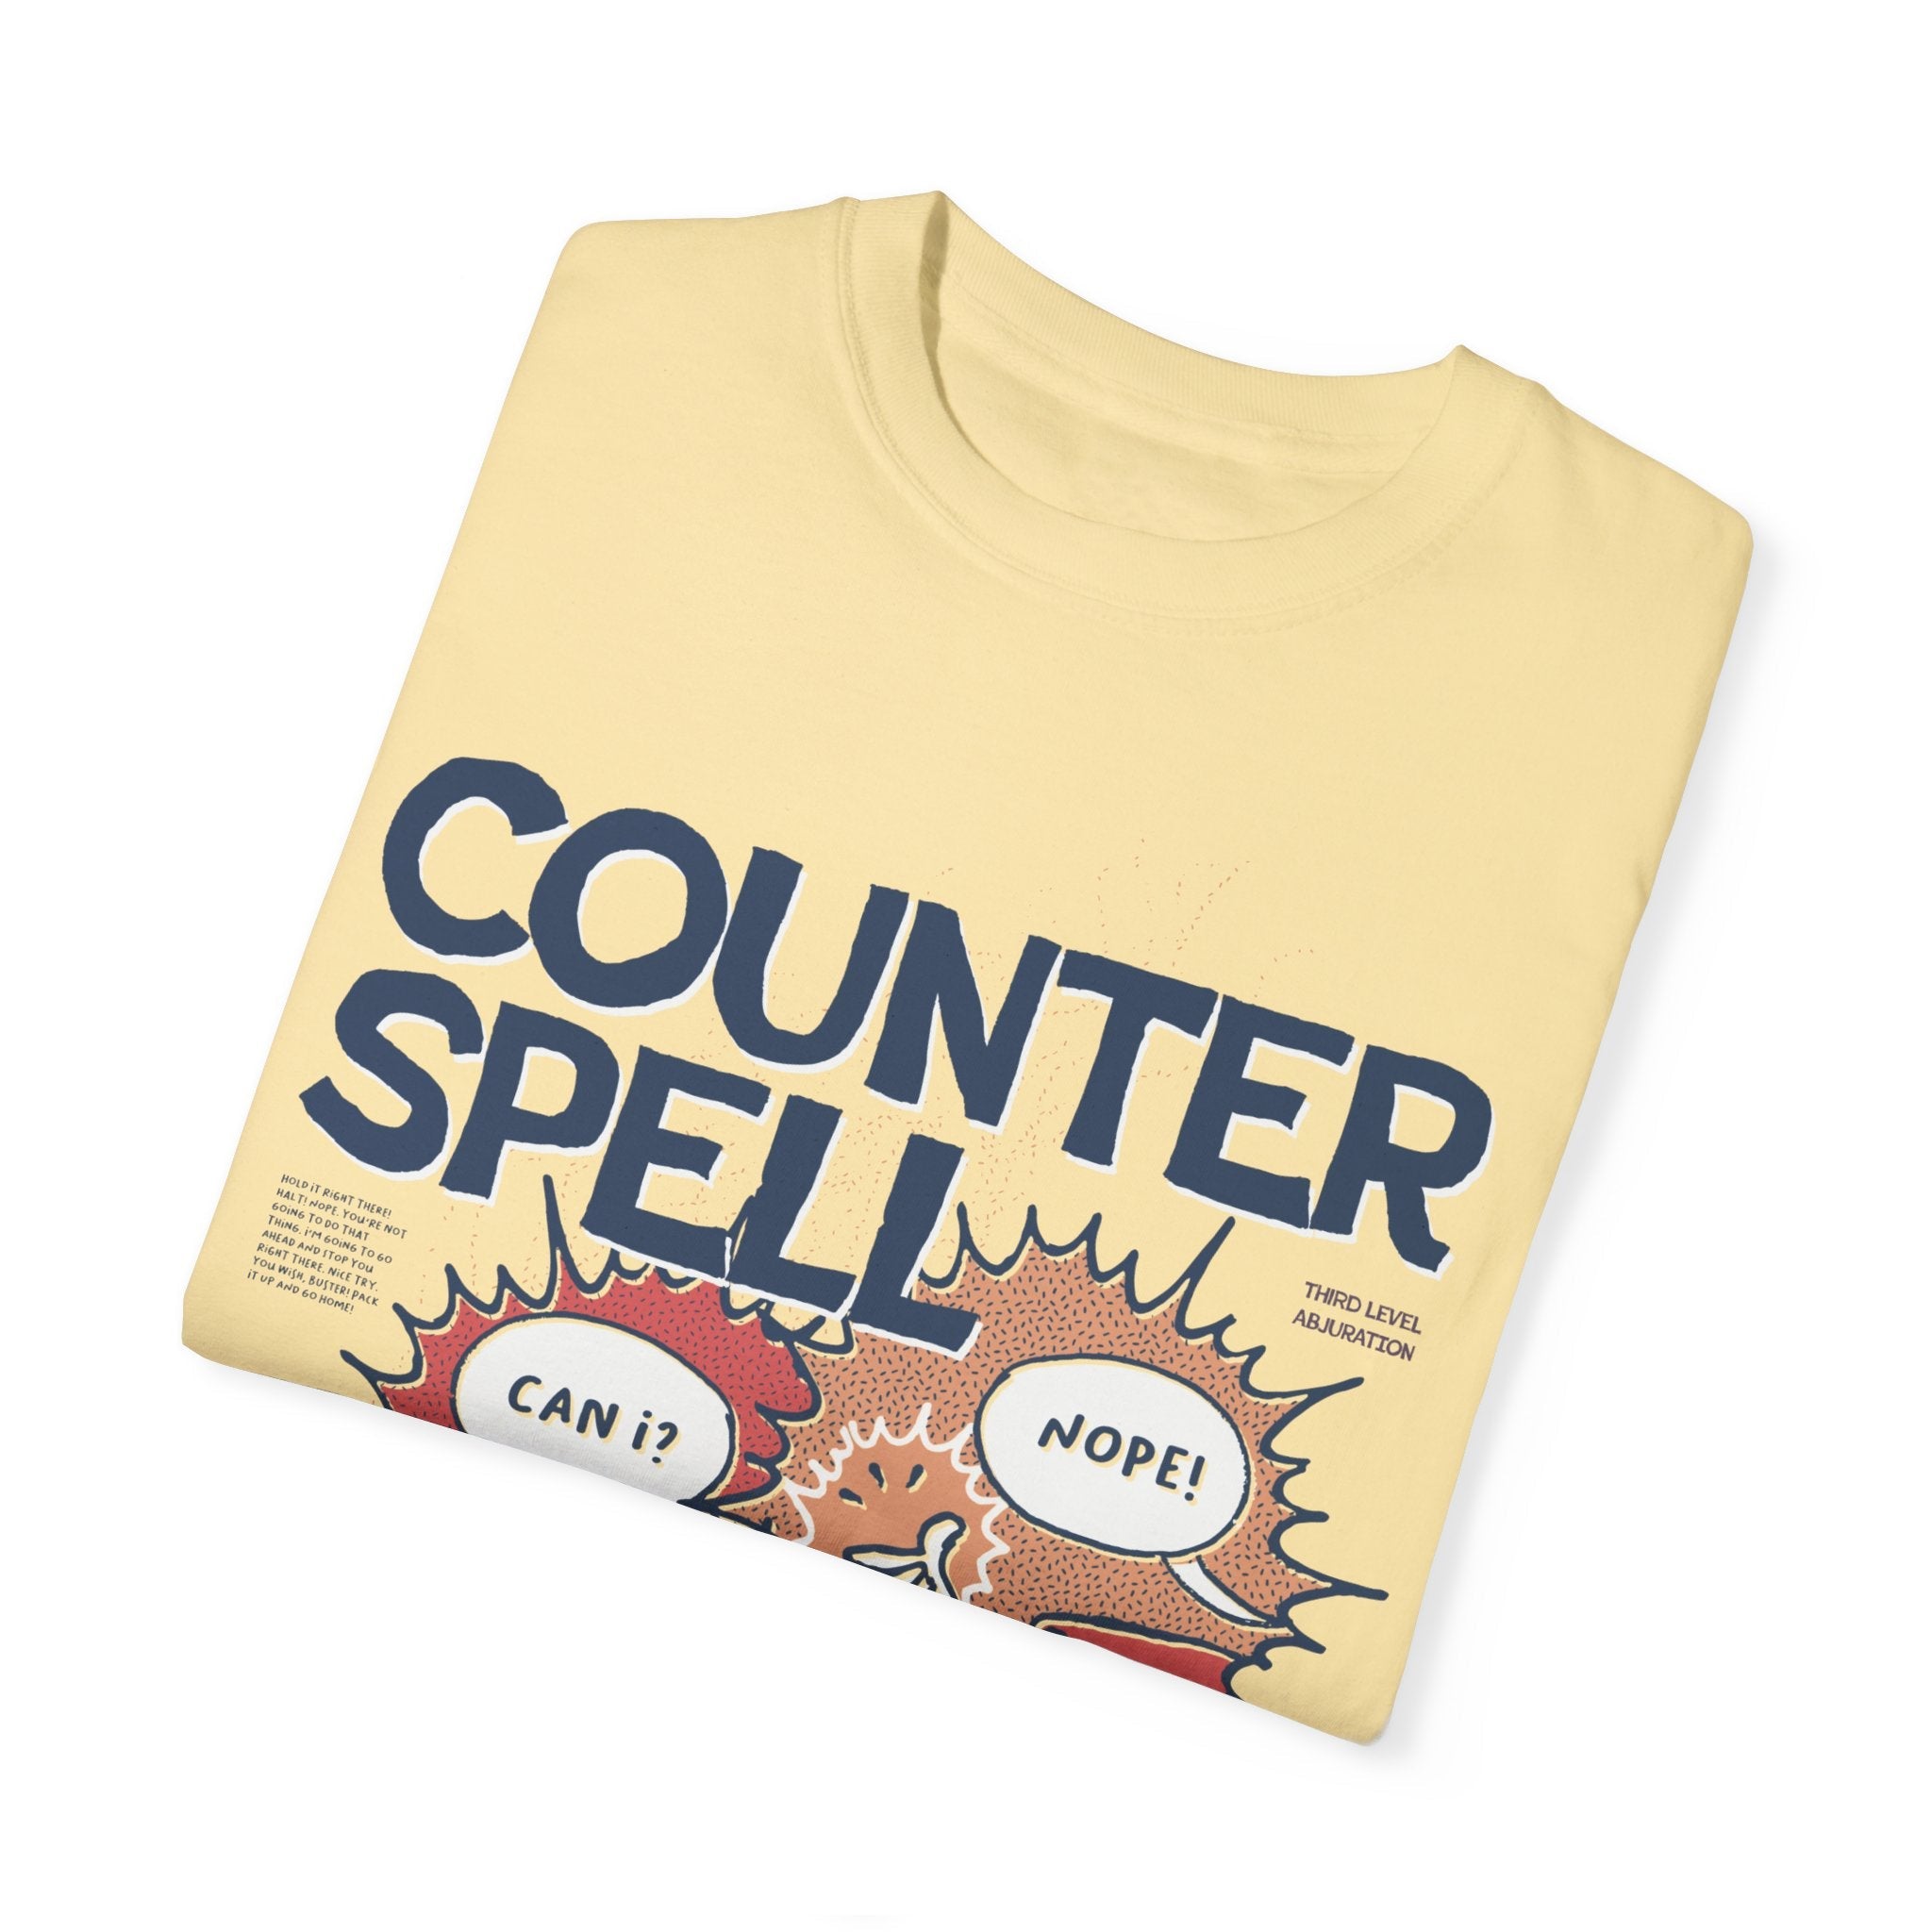 Counterspell | T - Shirt - T - Shirt - Ace of Gnomes - 70525195769496468998